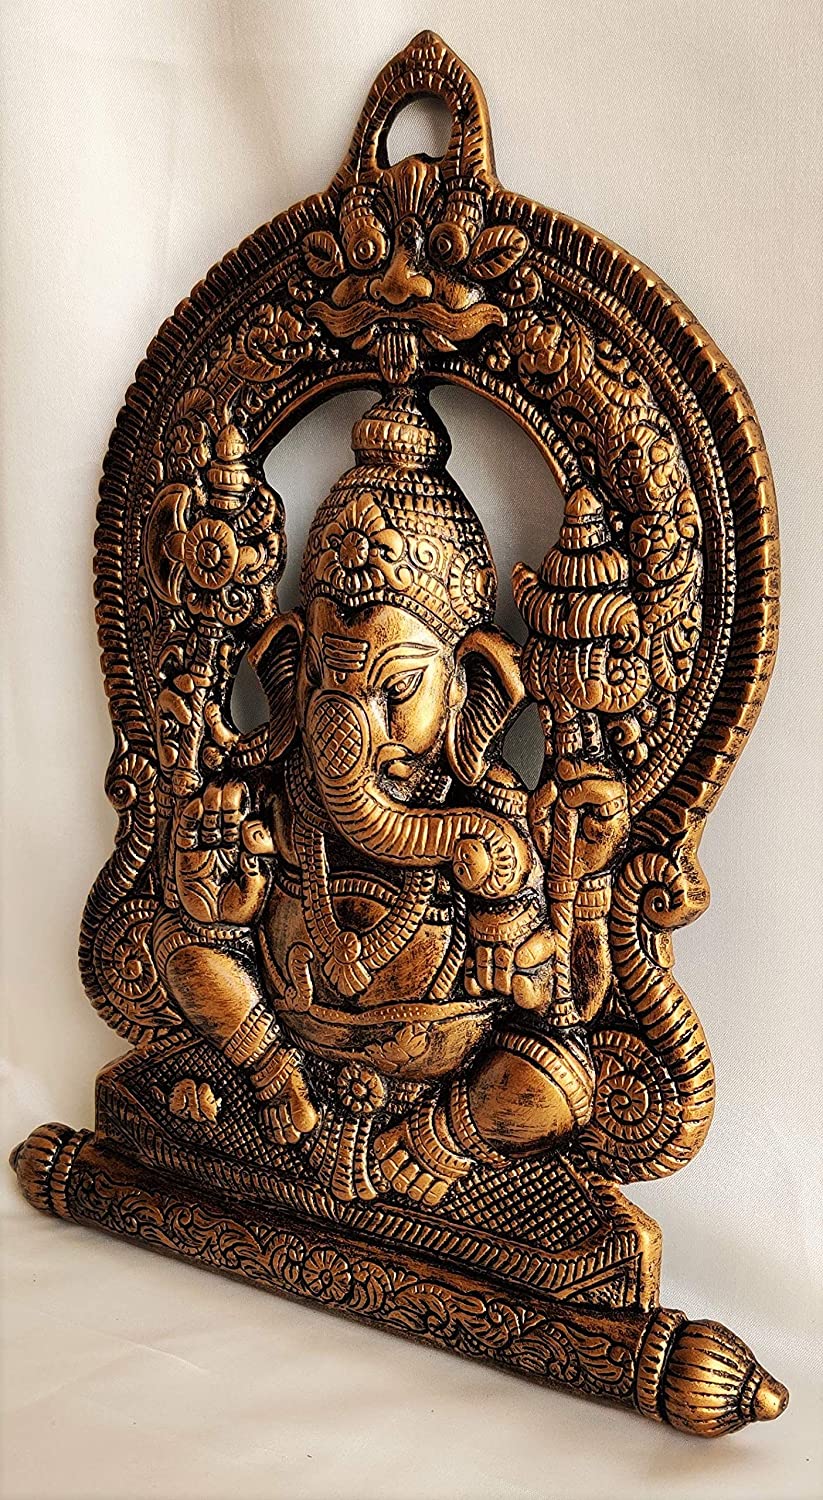 Metal Lord Ganesha Decorative Wall Hanging Showpiece - Antique Color (28 X 2 X 36 cm, 800g) Mangal Fashions | Indian Home Decor and Craft